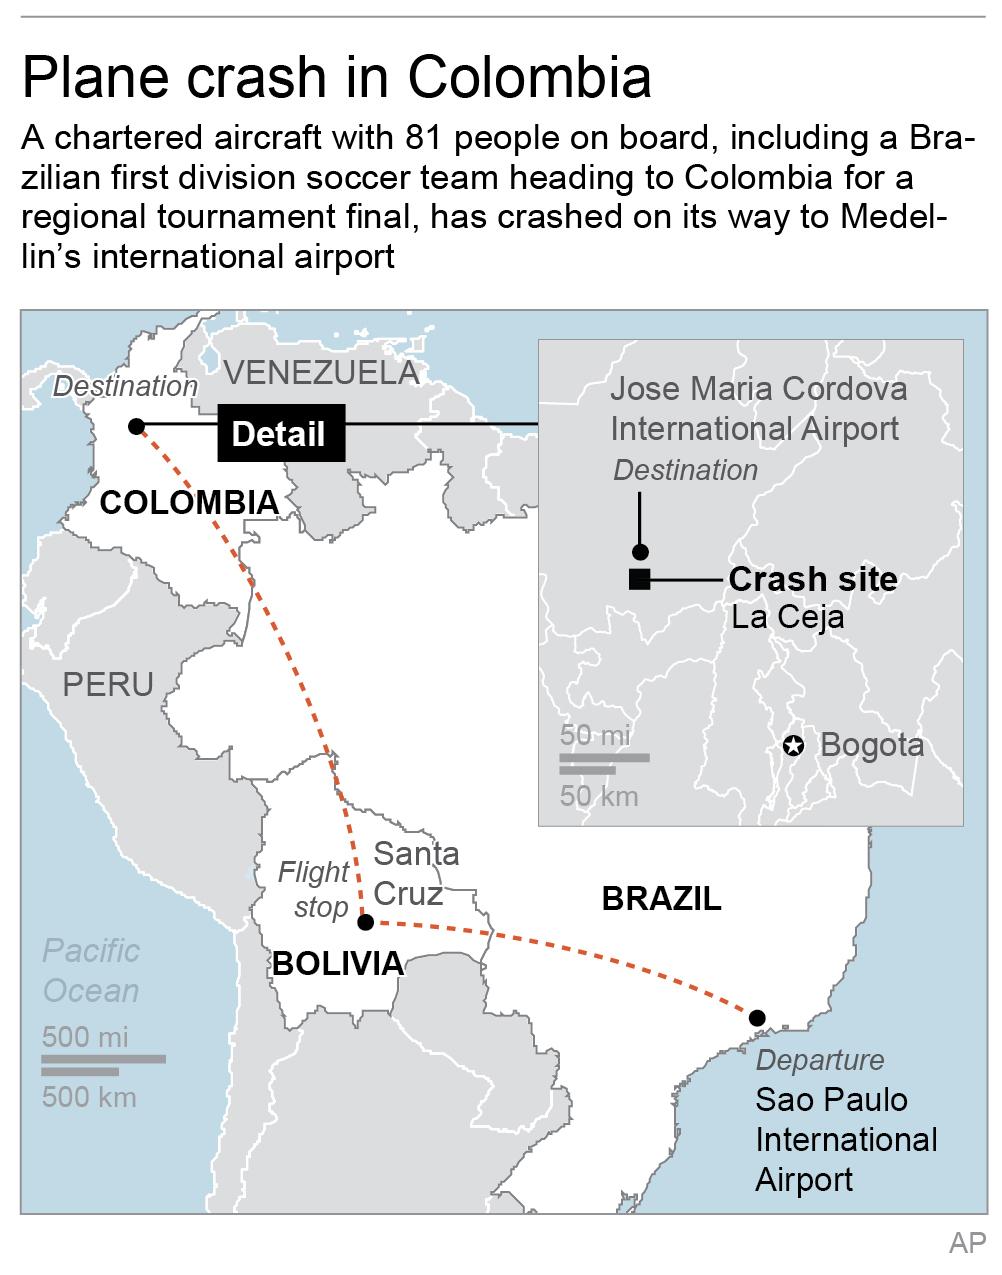 Map locates departure, flight stop, destination and crash site of plane heading to Colombia. (AP)